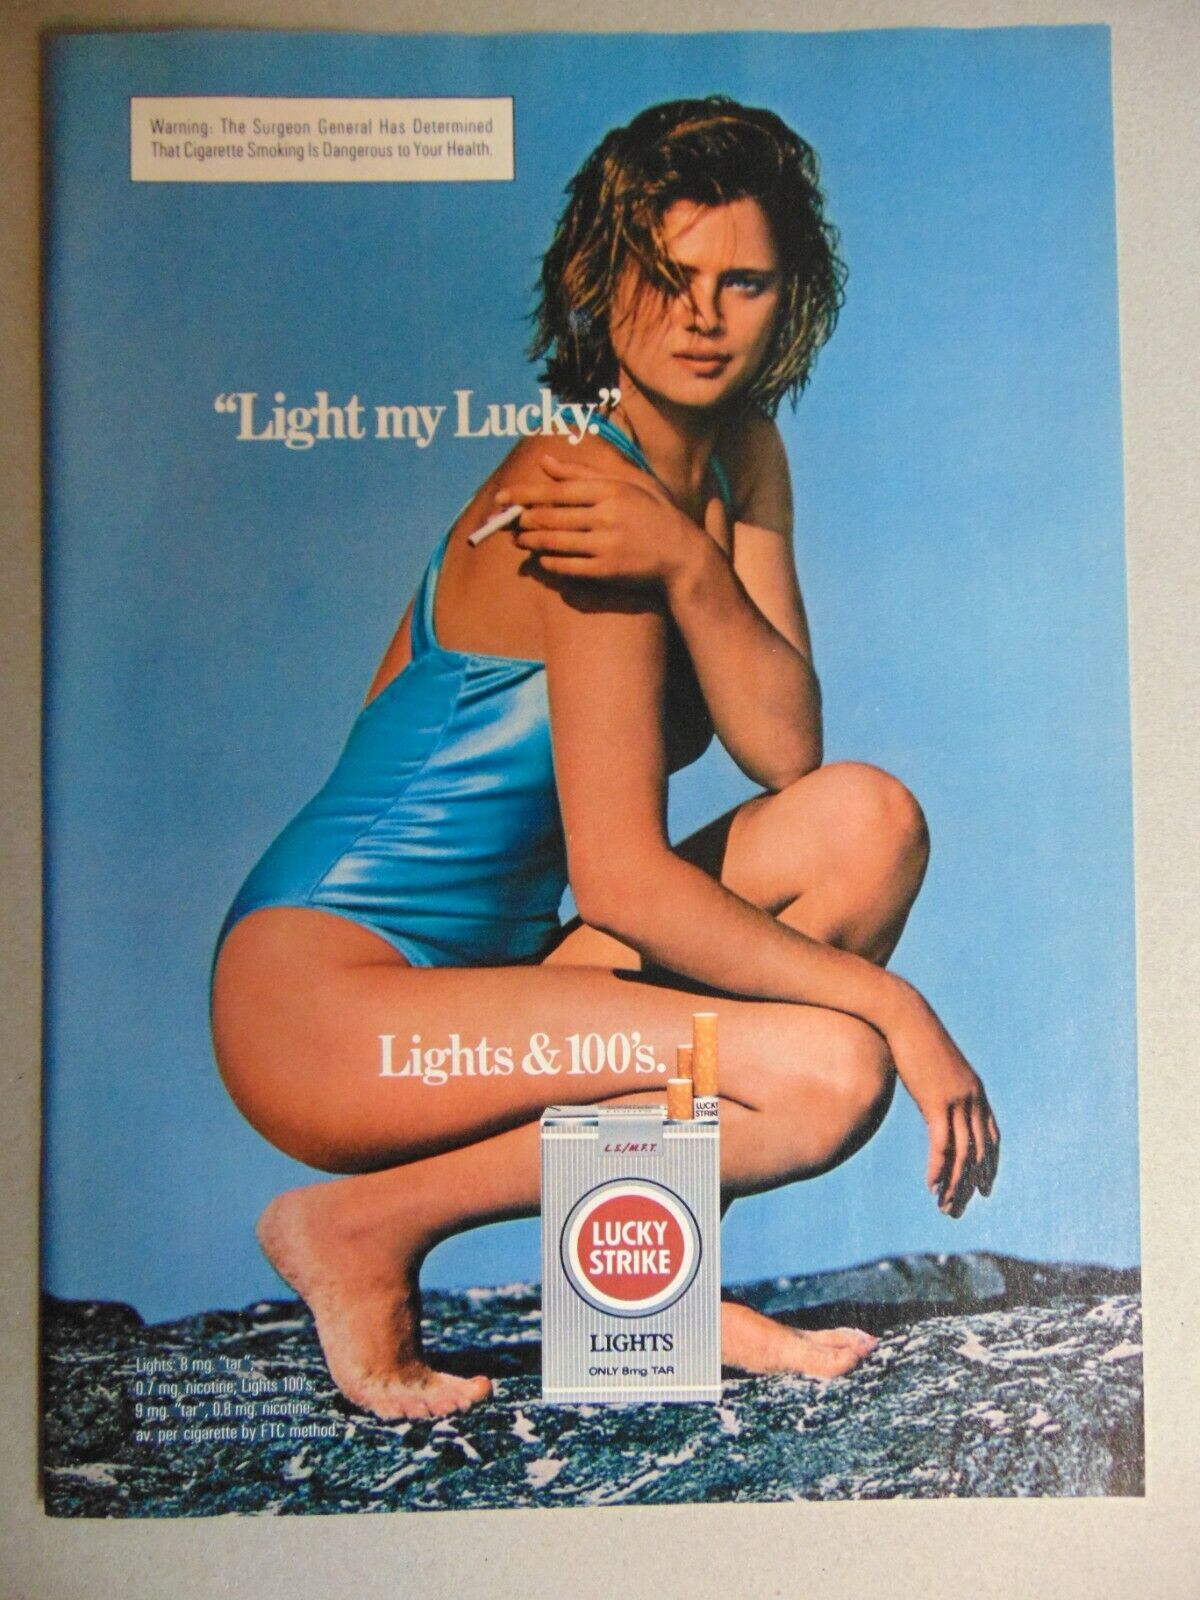 1985 LUCKY STRIKE Light My LUCKY says woman in swimsuit vintage art print ad